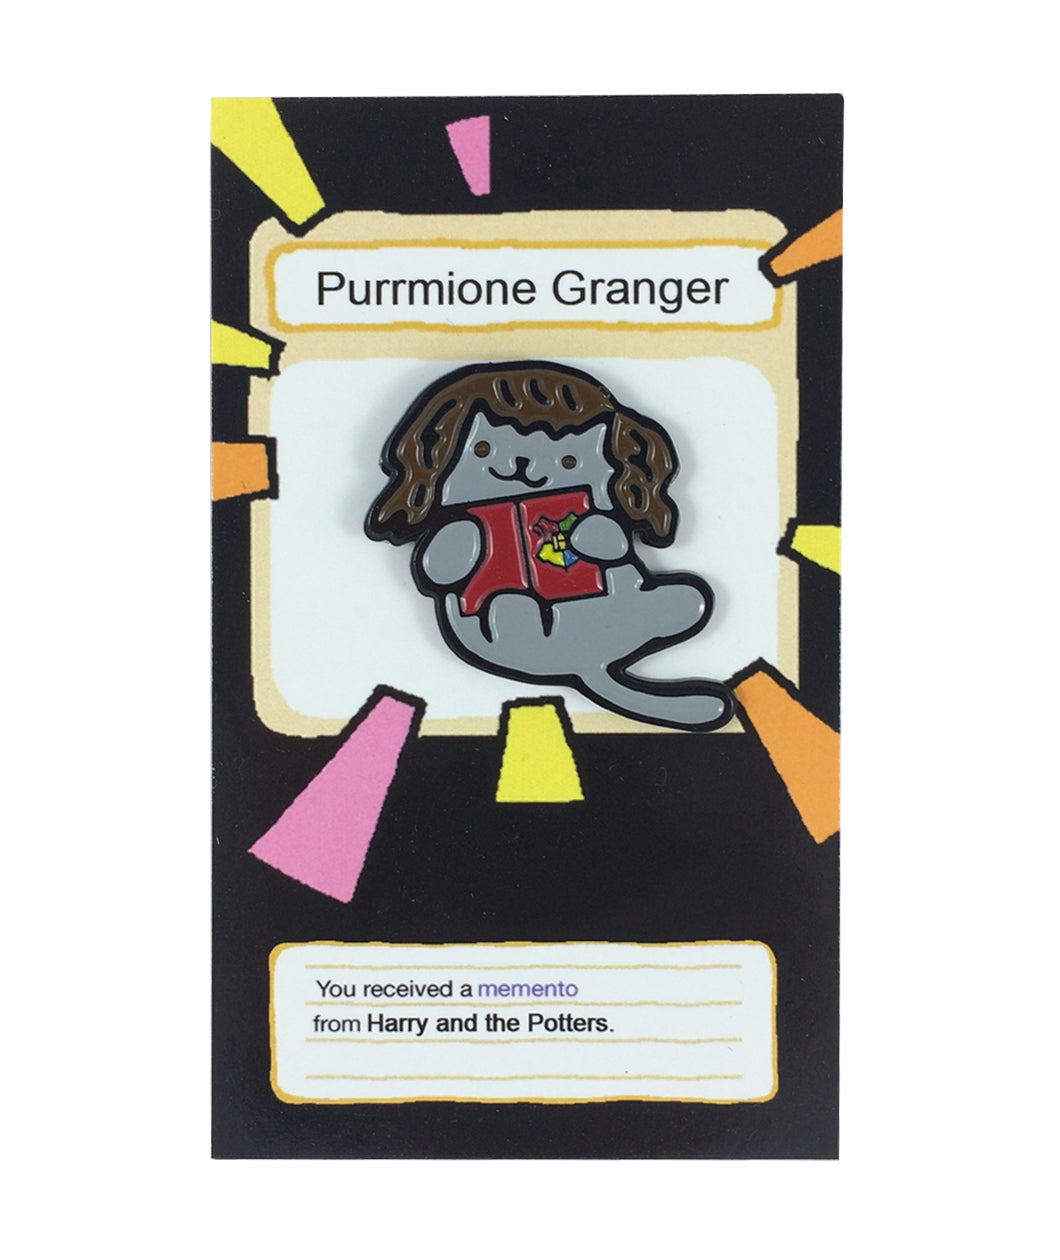 A pin shaped like a cat with brown hair, holding a book. The pin is on a pin backing with the text "Purrmione Granger" and "You received a memento from Harry and the Potters". 